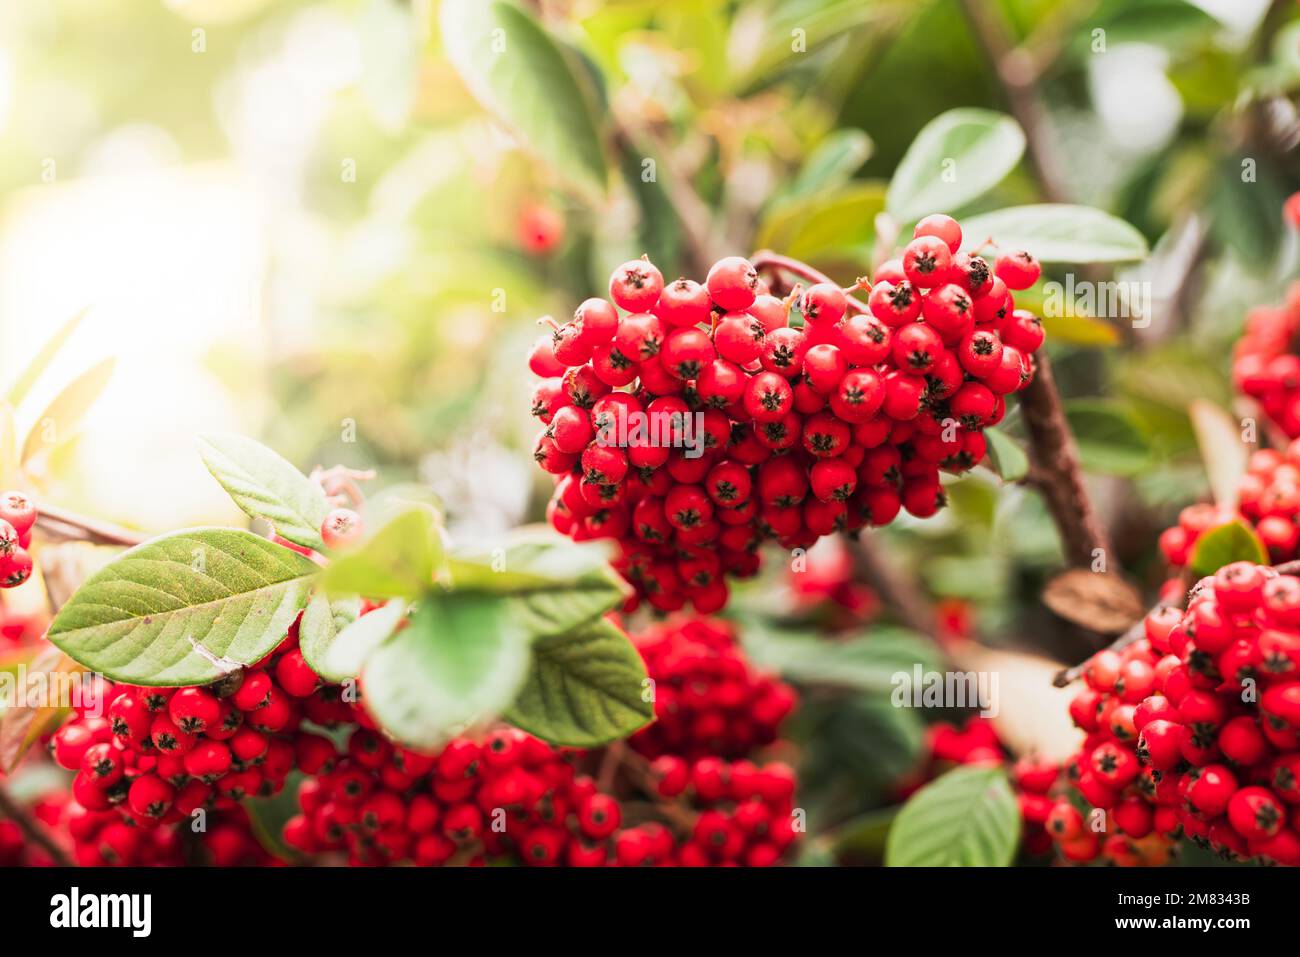 Cotoneaster berries close-up. Cotoneaster coriaceus ornamental plant with vibrant red berries and dark green foliage Stock Photo